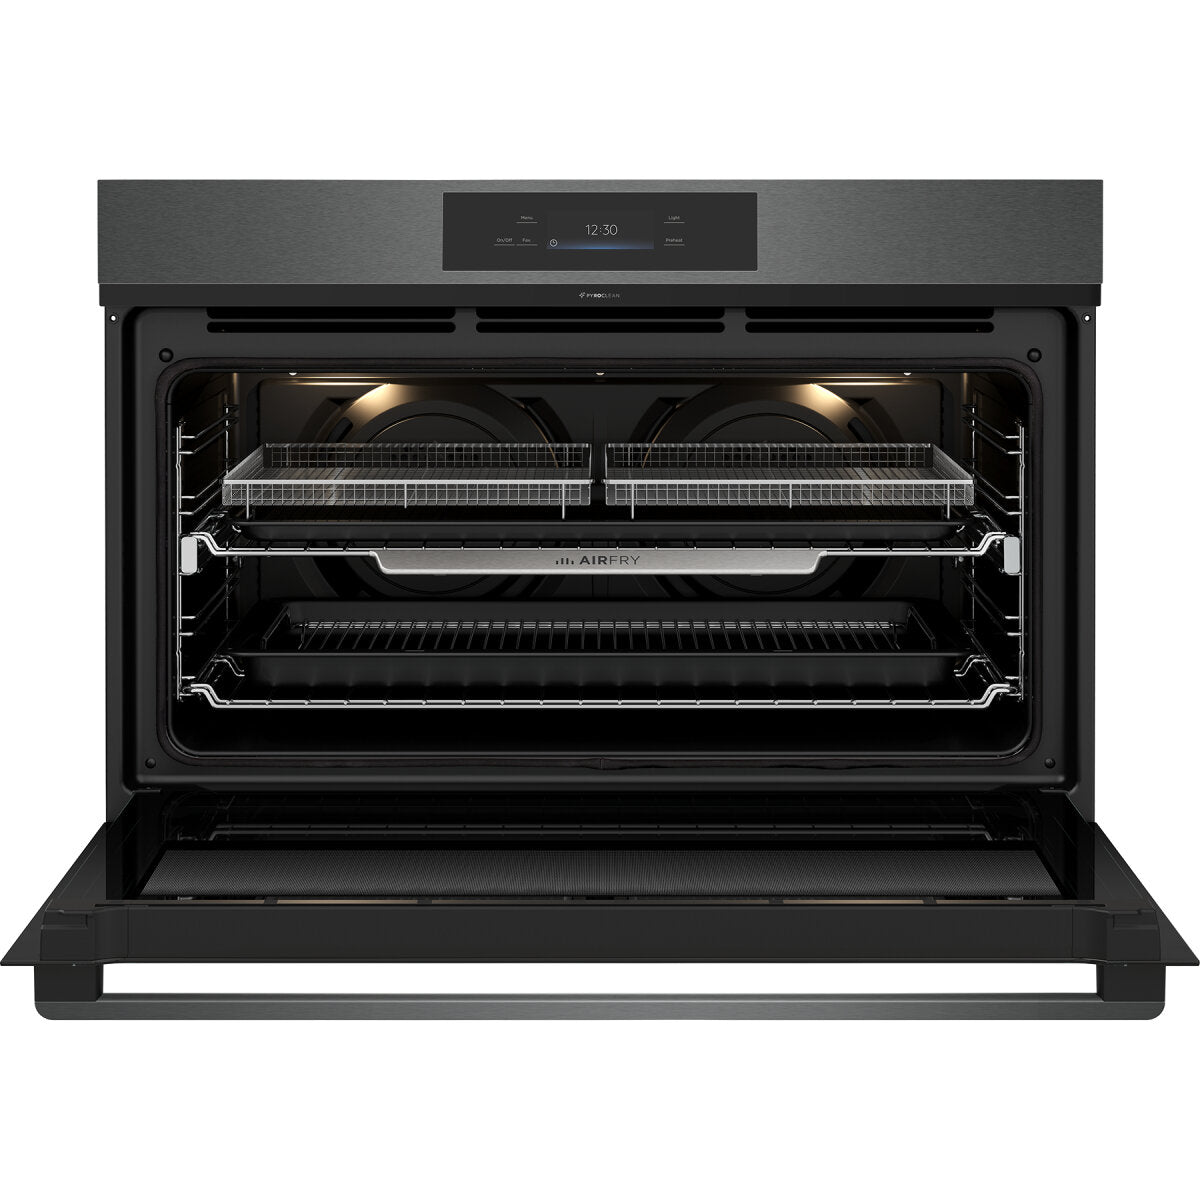 Westinghouse 90cm Multi-Function Pyrolytic Oven and SteamBake Dark Stainless Steel Model WVEP9917DD